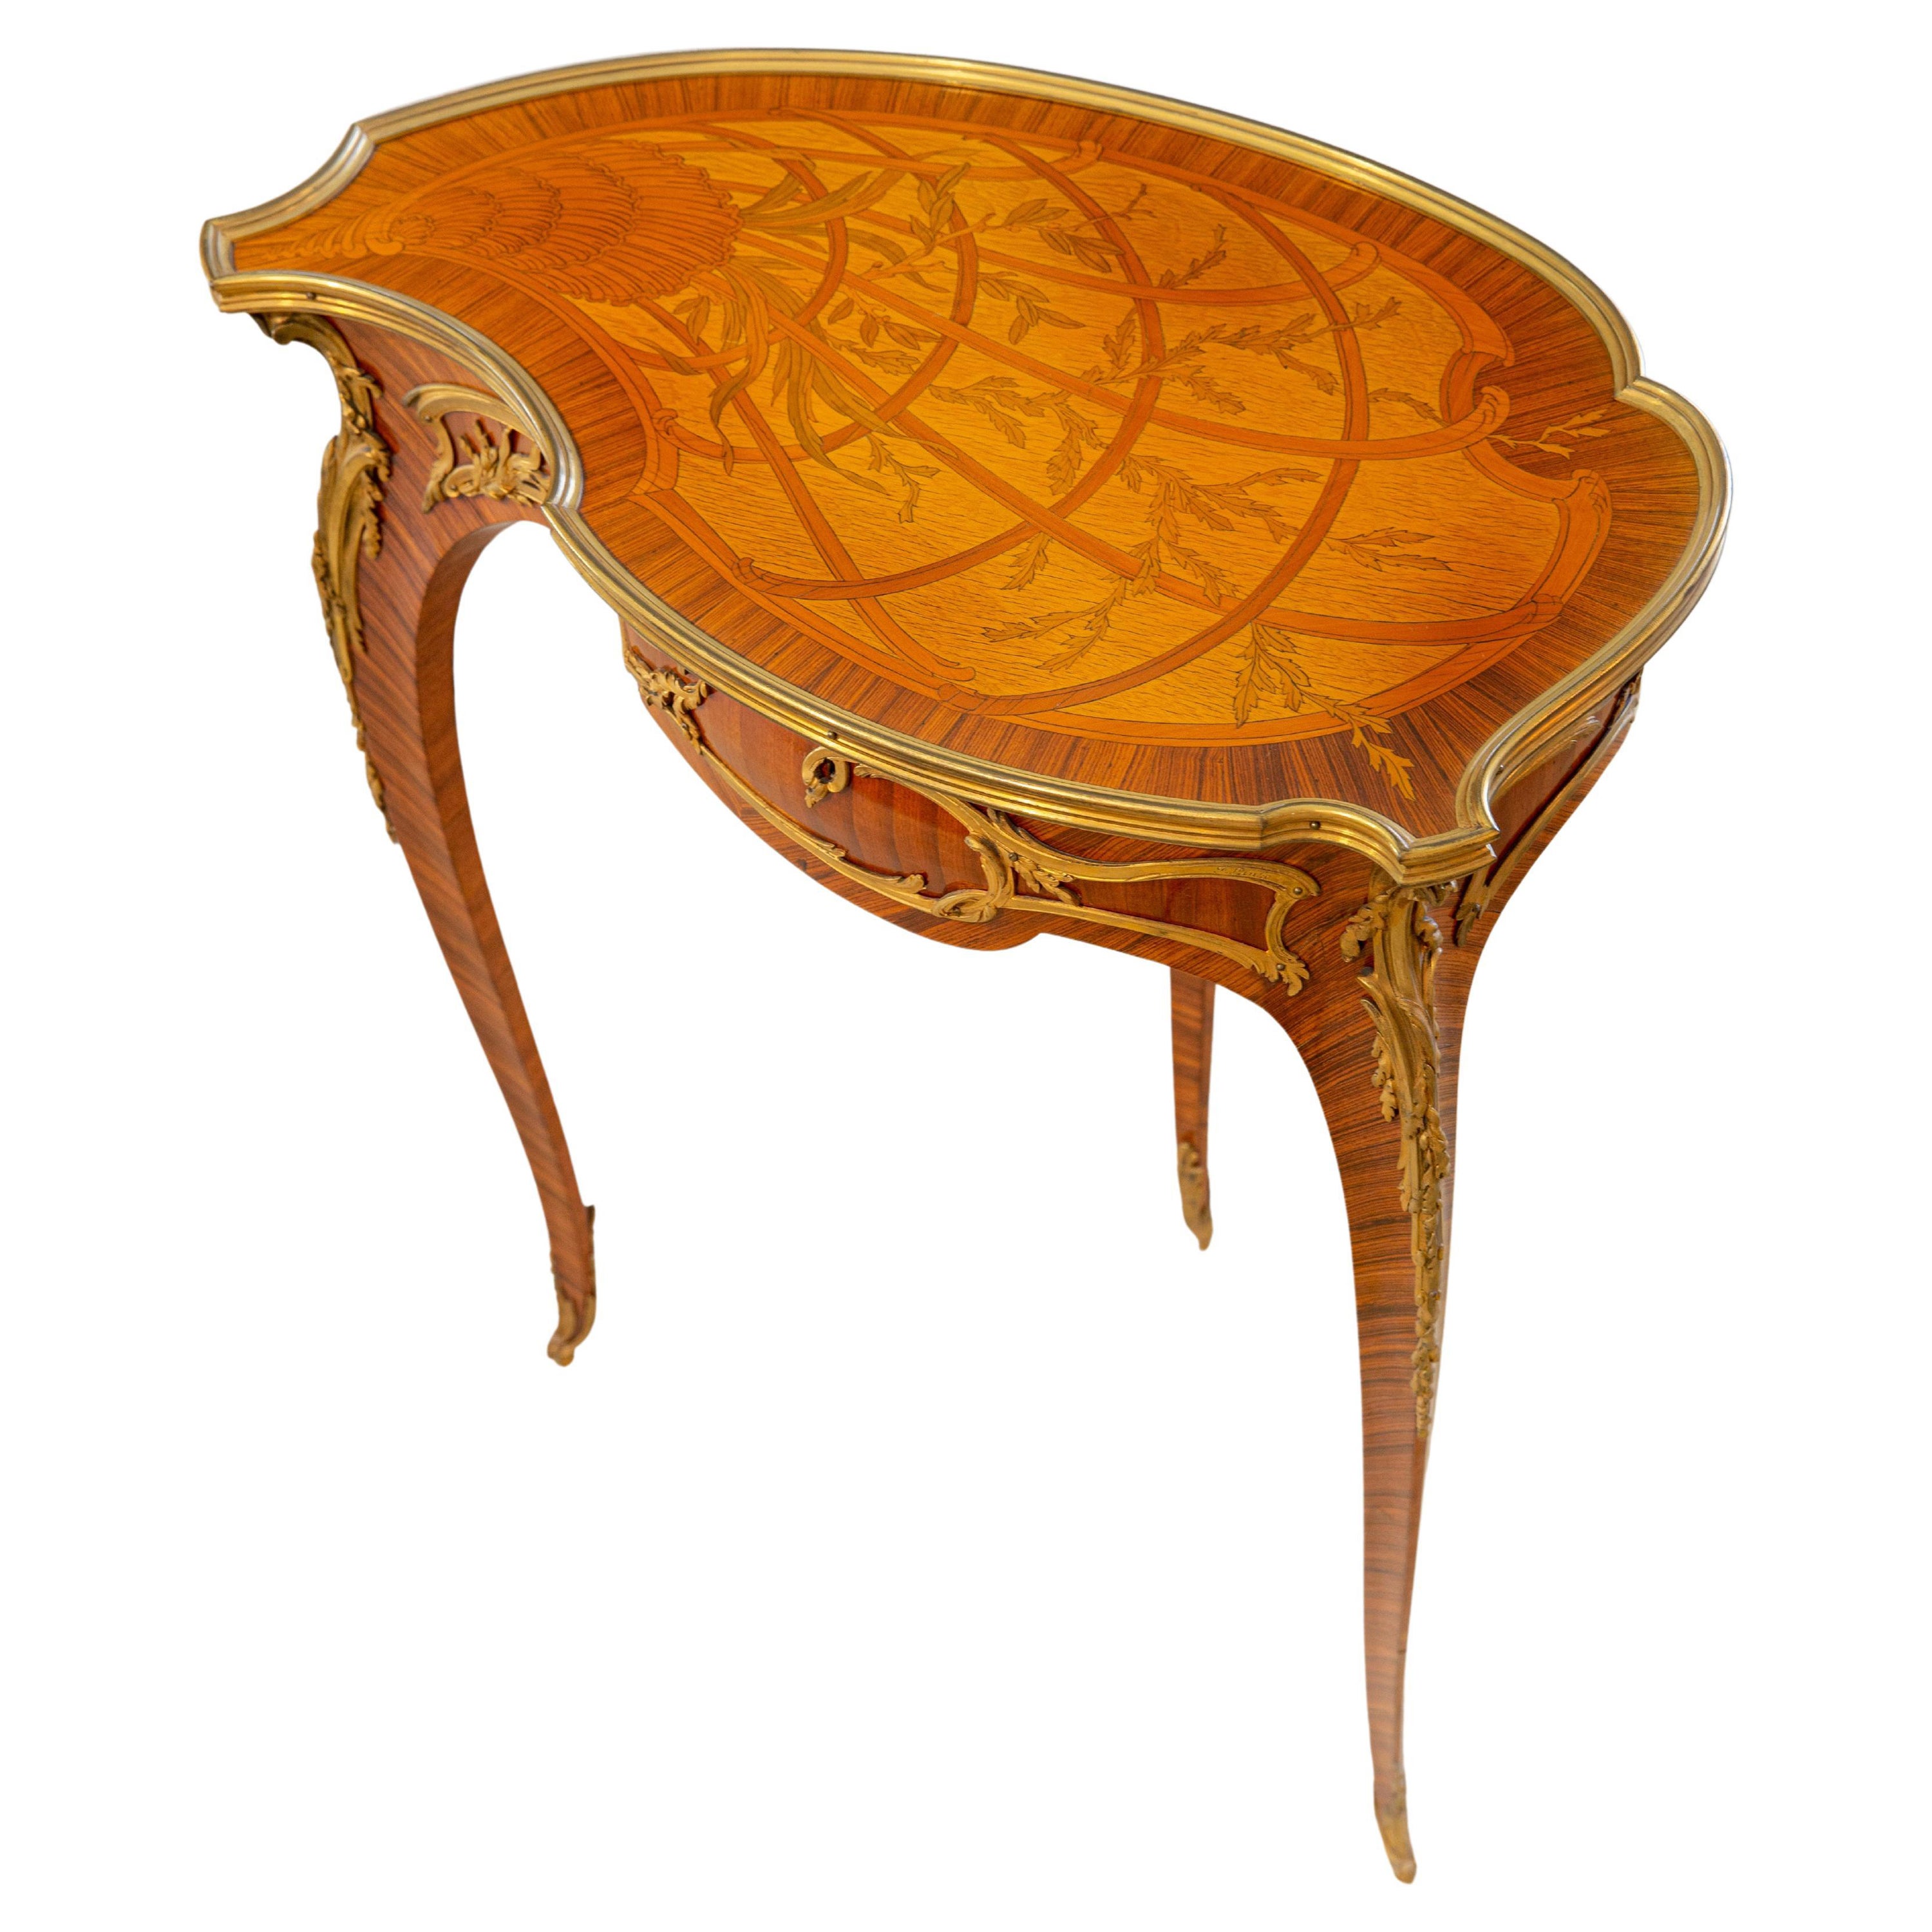 A Very Special Gilt Bronze Mounted Marquetry “Coquille” Table by François Linke For Sale